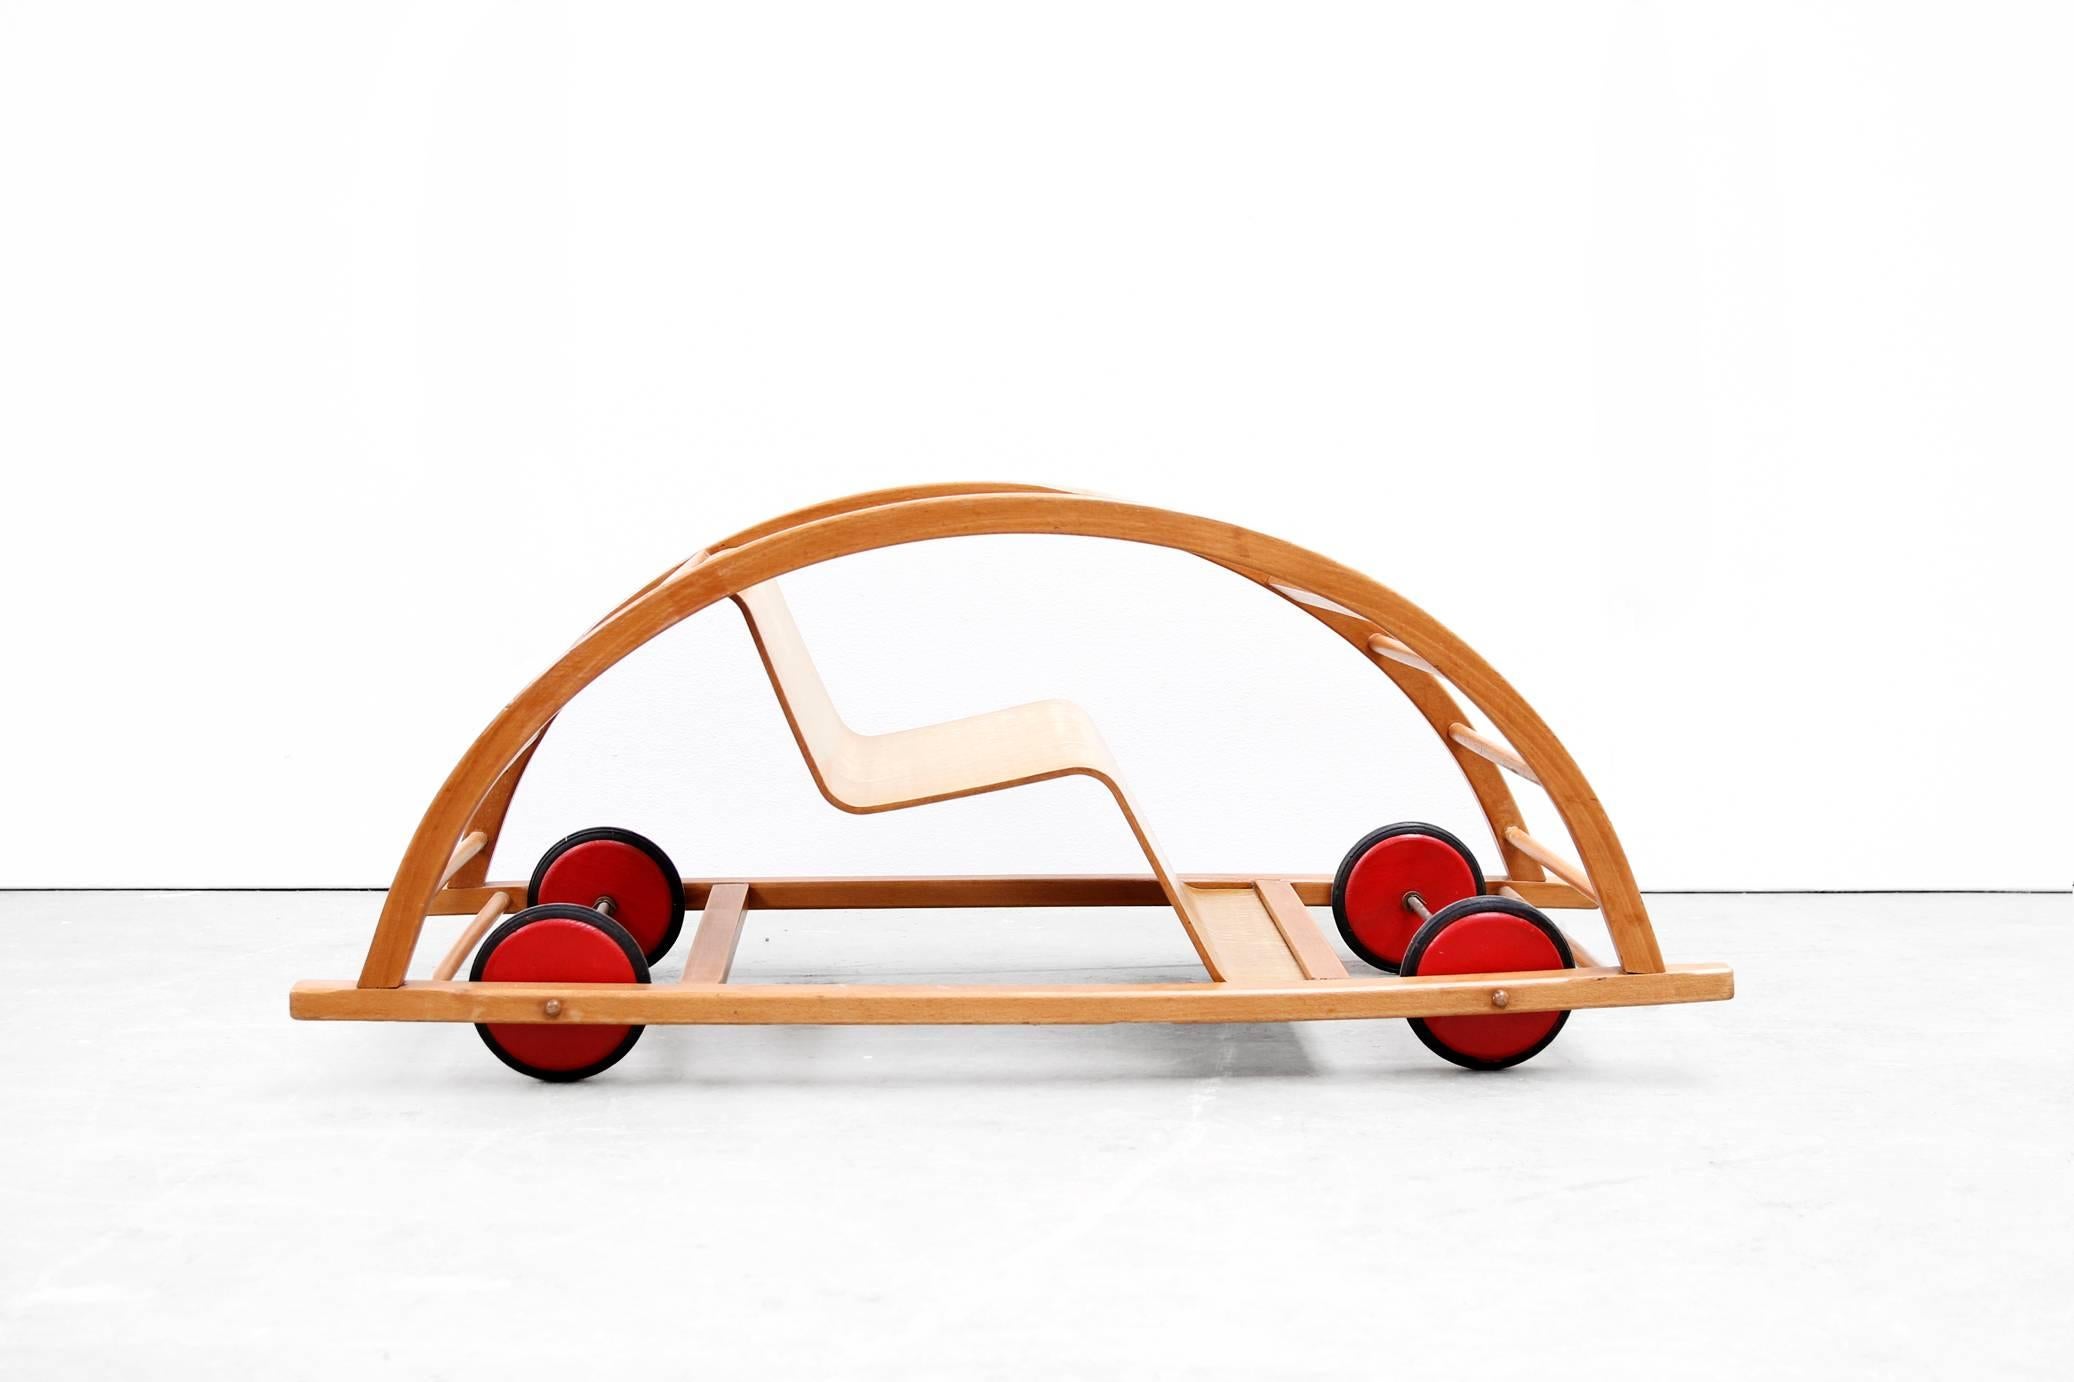 Very nice rocking chair, which can be used as a race car as you turn it. This fantastic design car for children is called Schaukelwagen and is designed by Hans Brockhage and Erwin Andra supervised by Mart Stam in Germany (DDR). In 1956 this swing